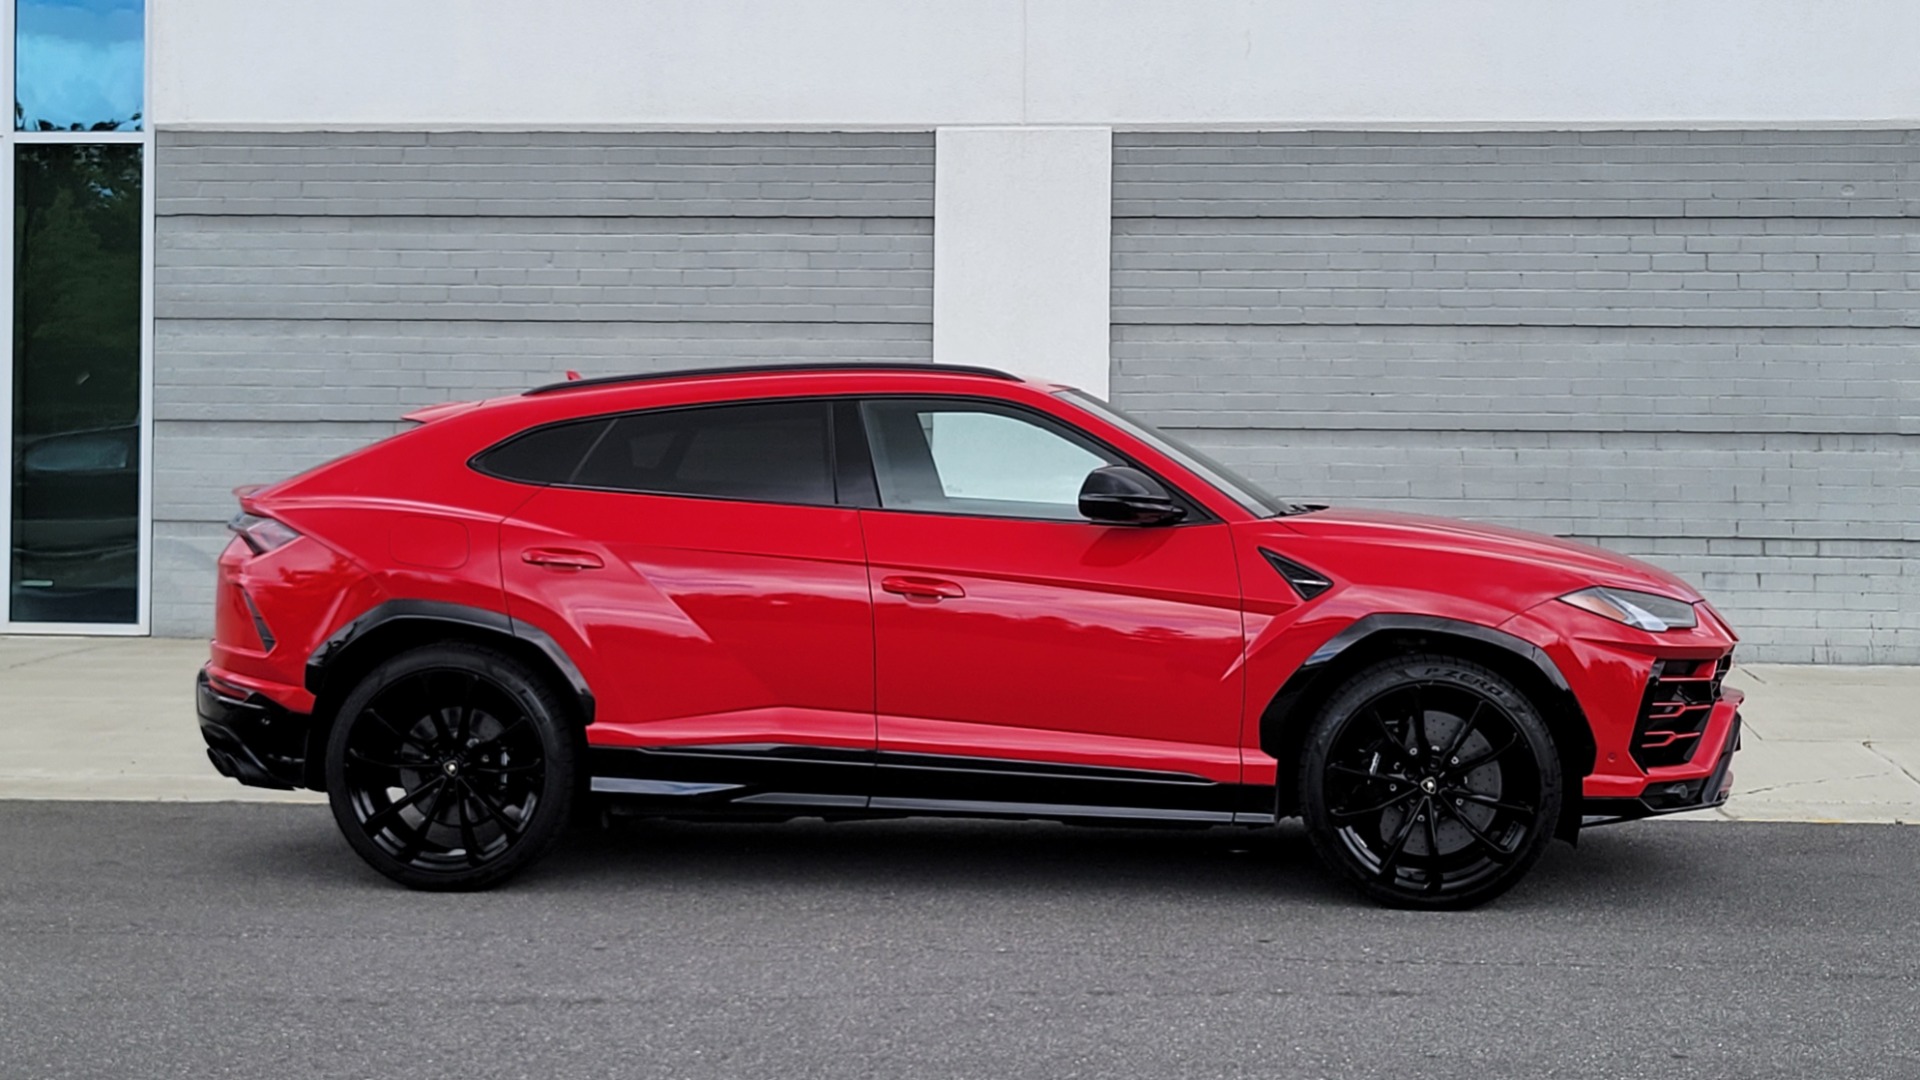 Used 2019 Lamborghini URUS 4.0L V8 / AUTO / AWD / NAV / SUNROOF / LEATHER / REARVIEW for sale Sold at Formula Imports in Charlotte NC 28227 9